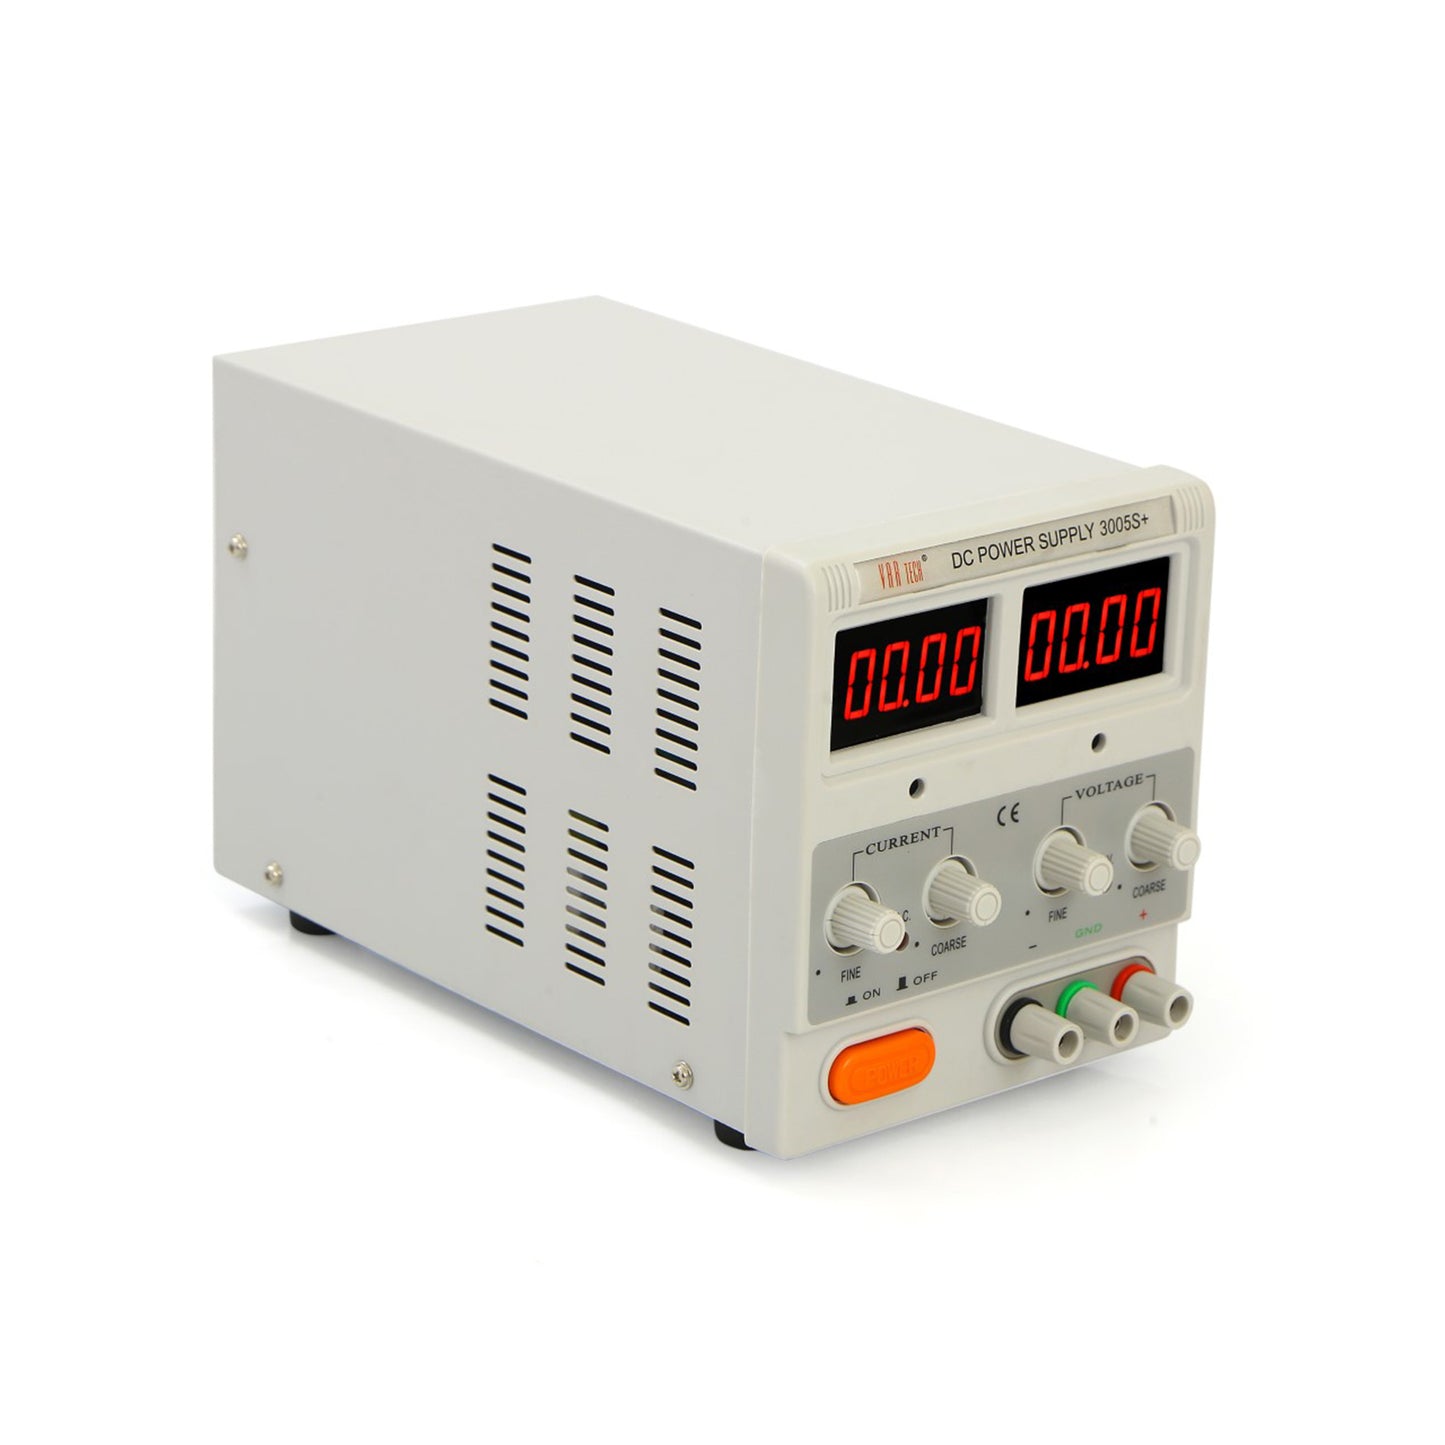 3005 S+ 30V 5A SMPS Based DC regulated power supply